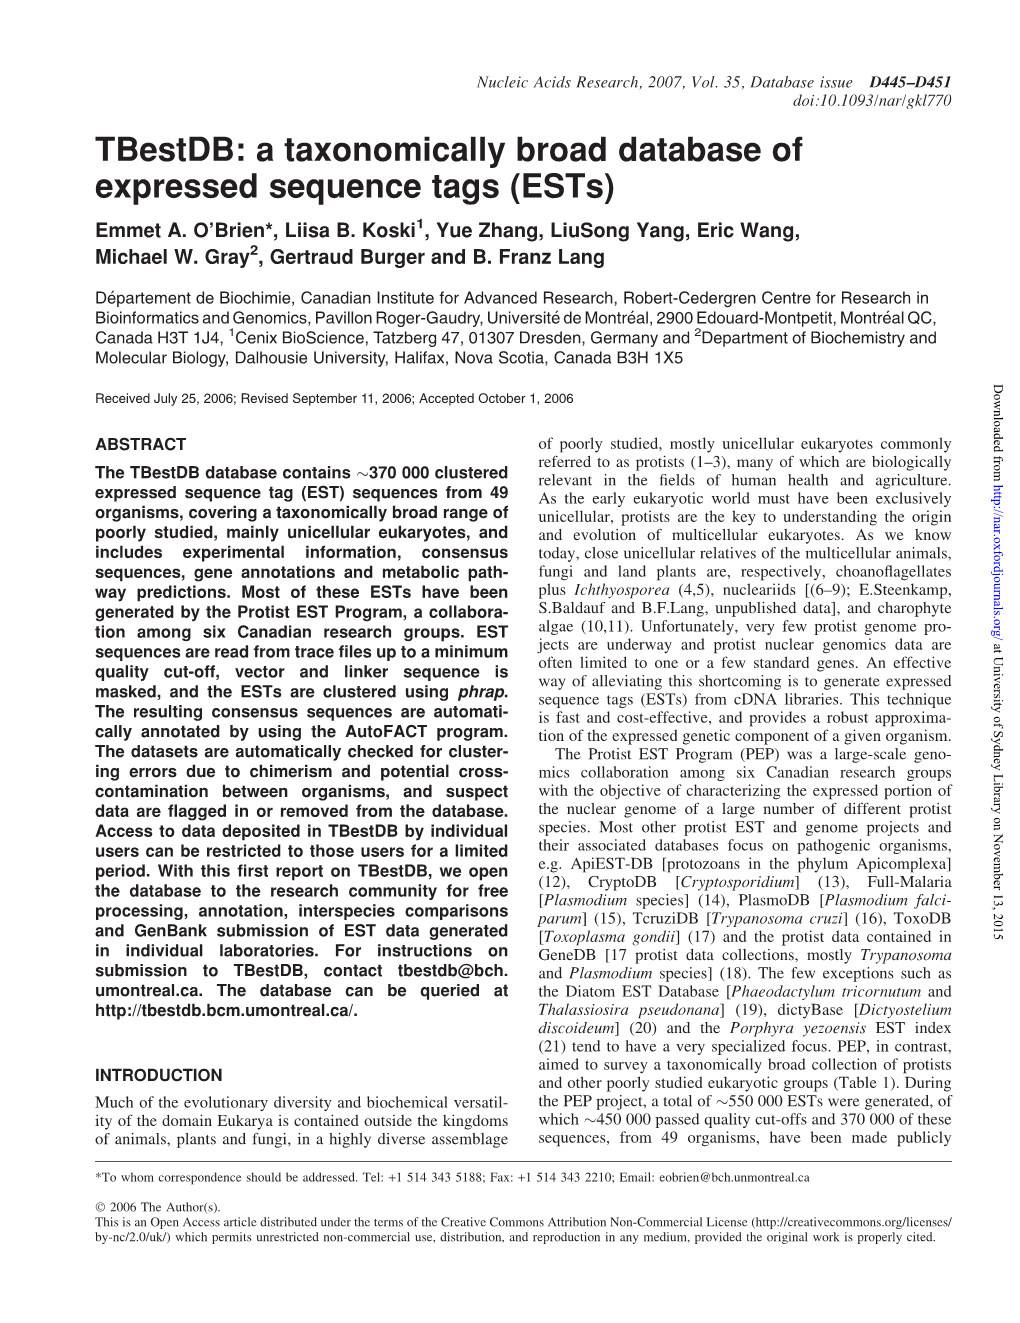 Tbestdb: a Taxonomically Broad Database of Expressed Sequence Tags (Ests) Emmet A